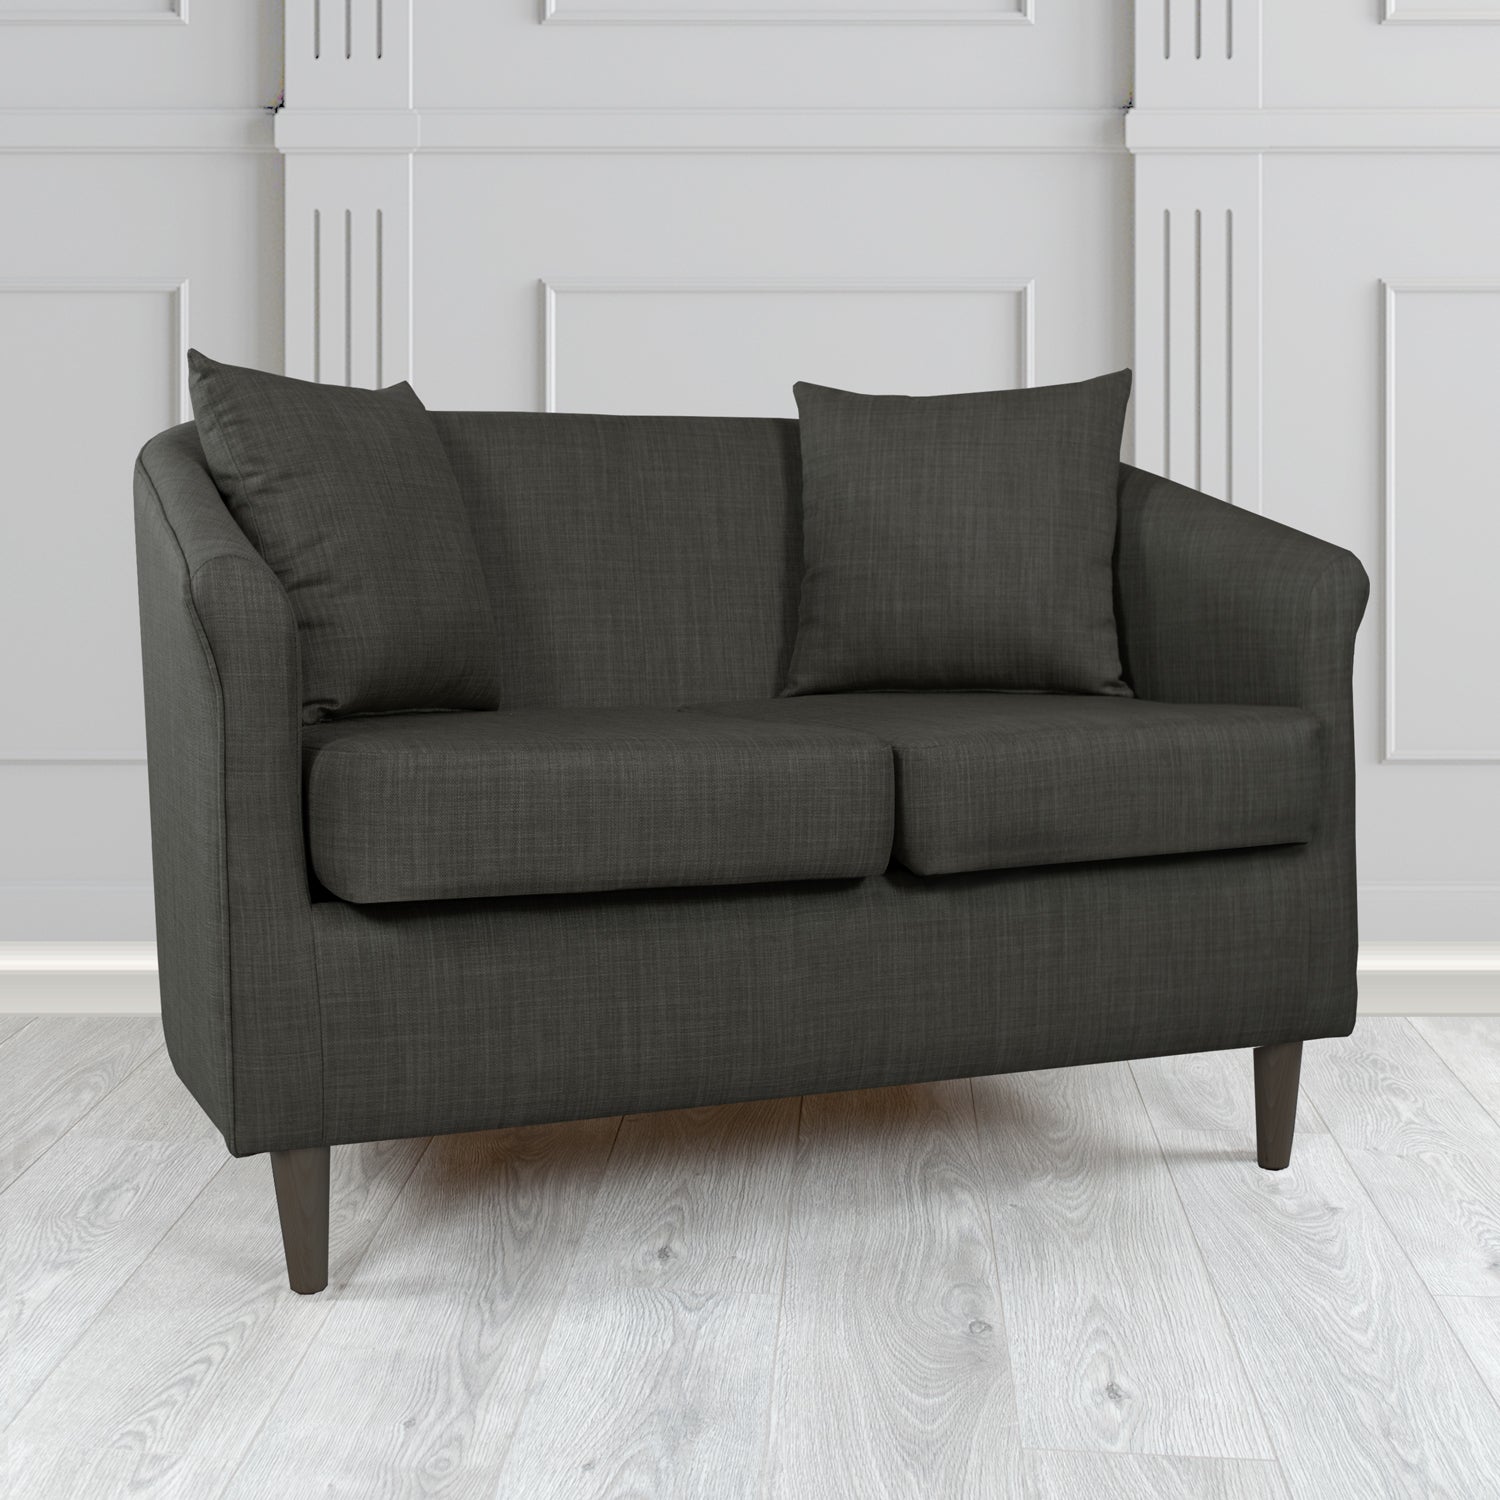 St Tropez Charles Ebony Plain Linen Fabric 2 Seater Tub Sofa with Scatter Cushions - The Tub Chair Shop